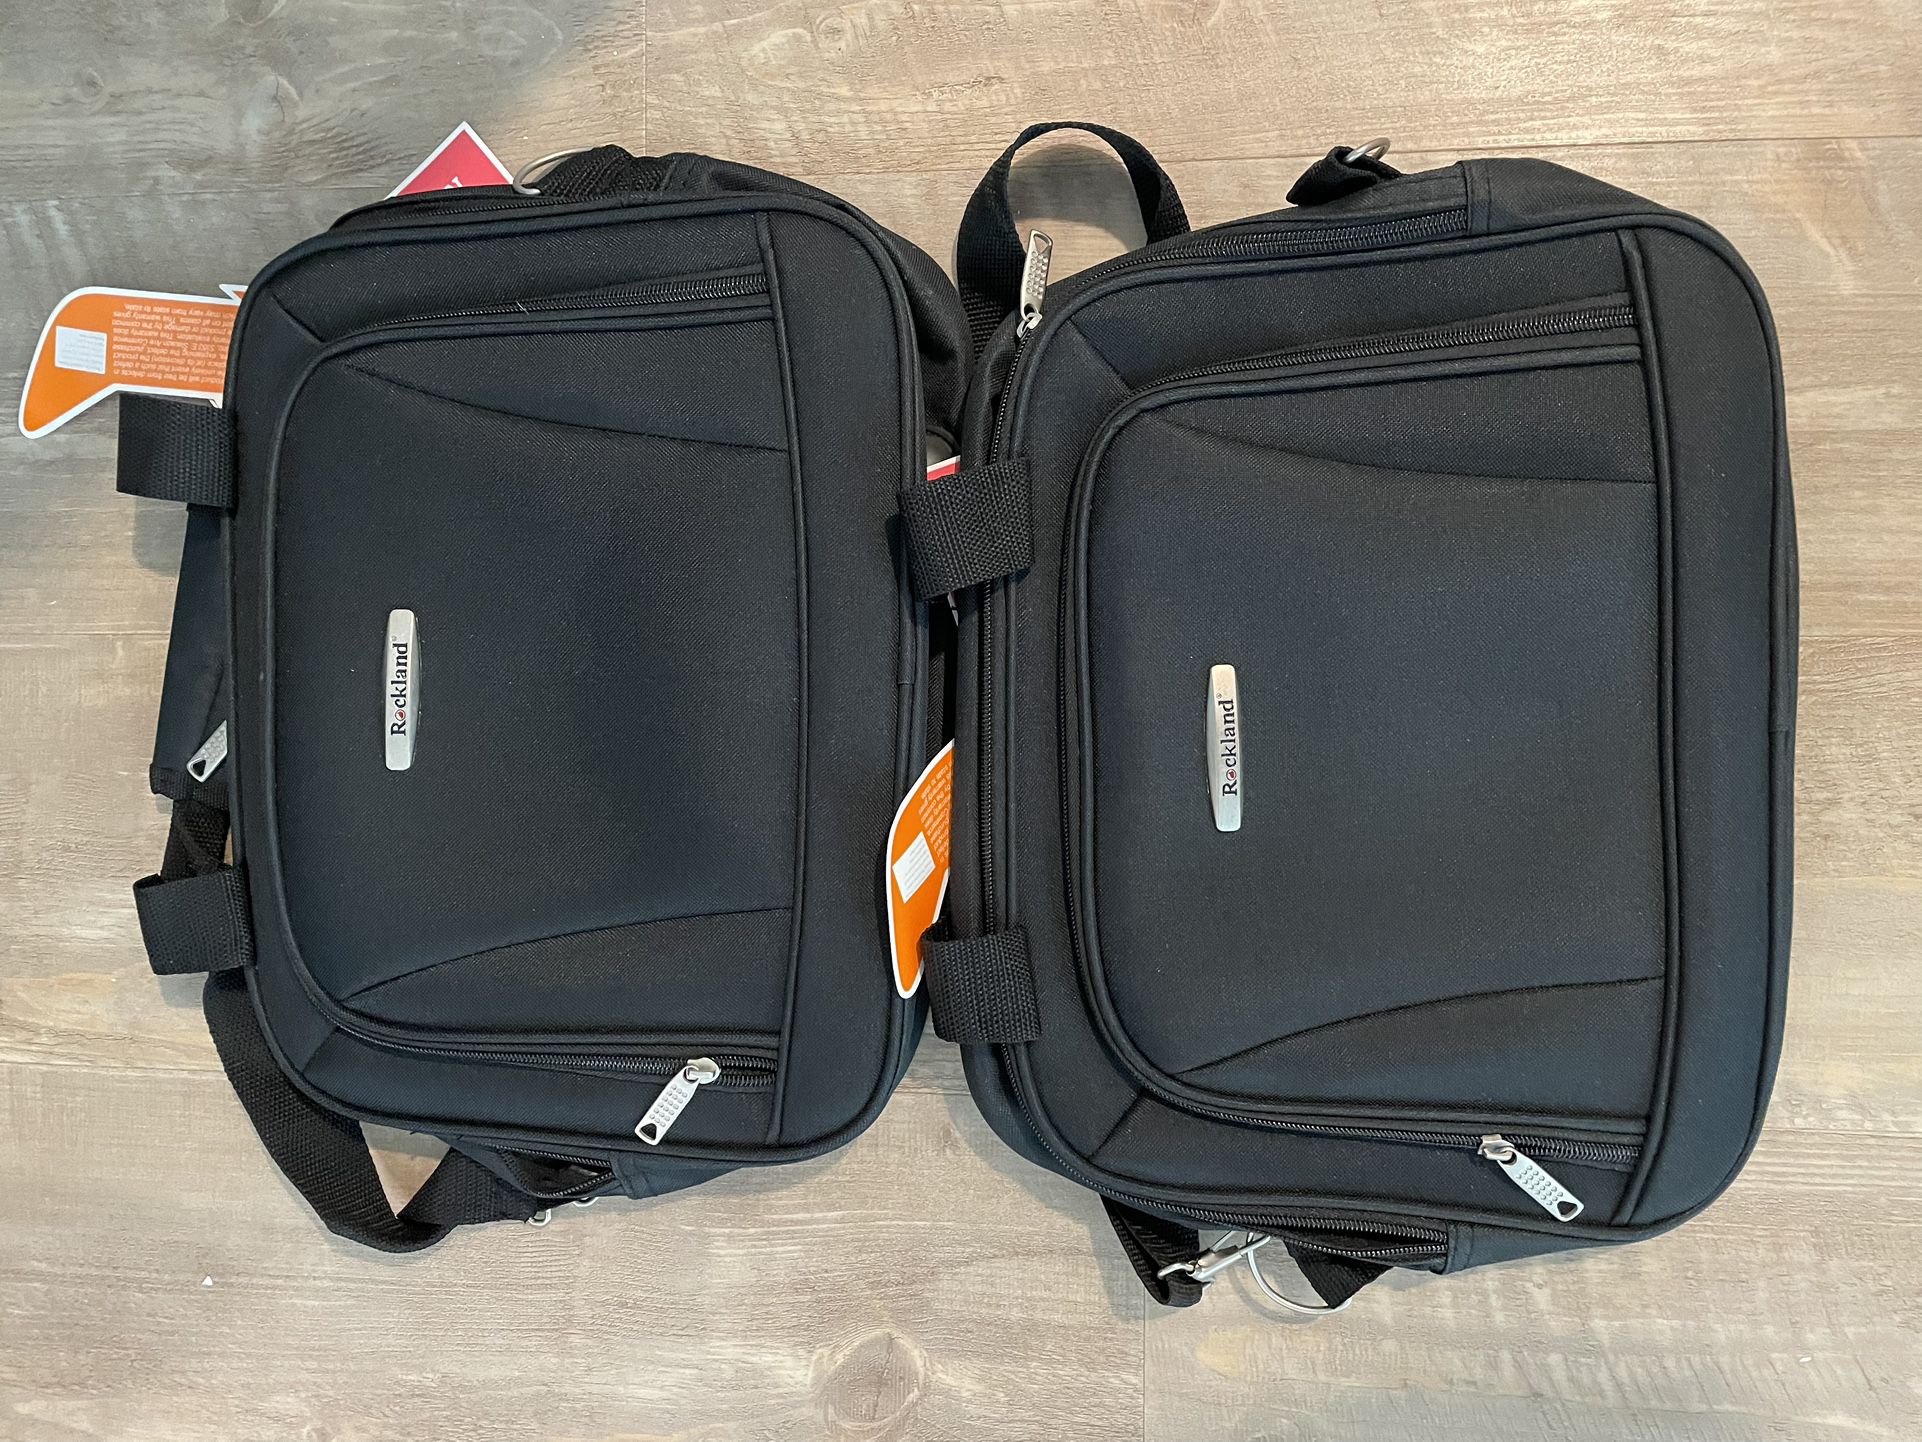 Free Small Travel Bags